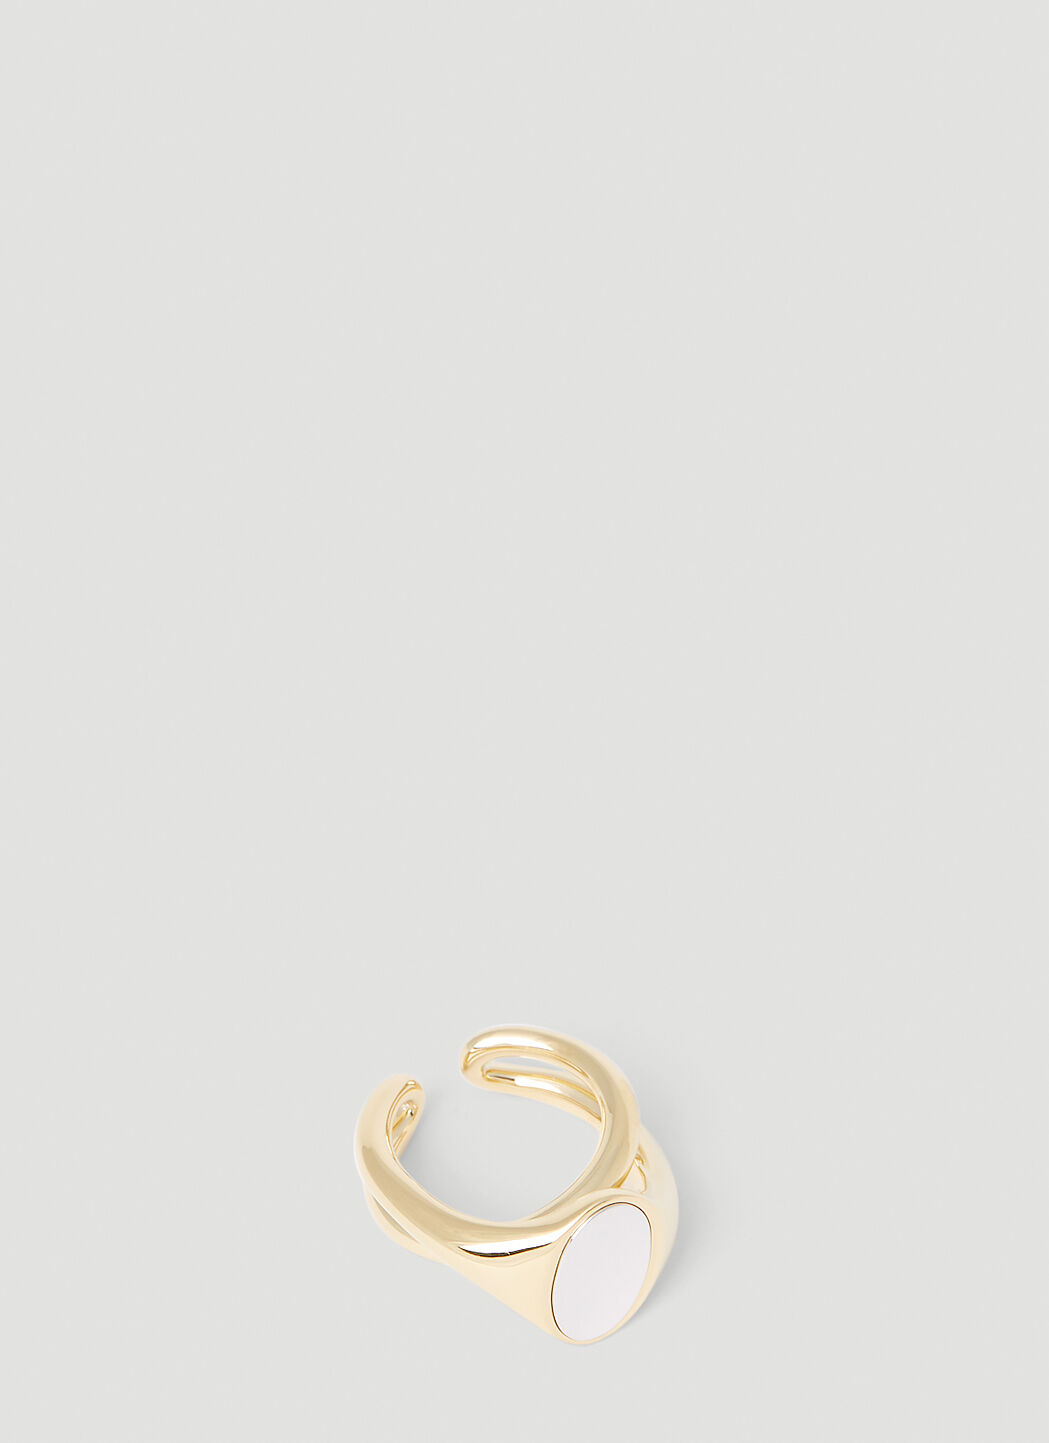 Charlotte CHESNAIS Chevaliere Initial Ring Gold ccn0254001